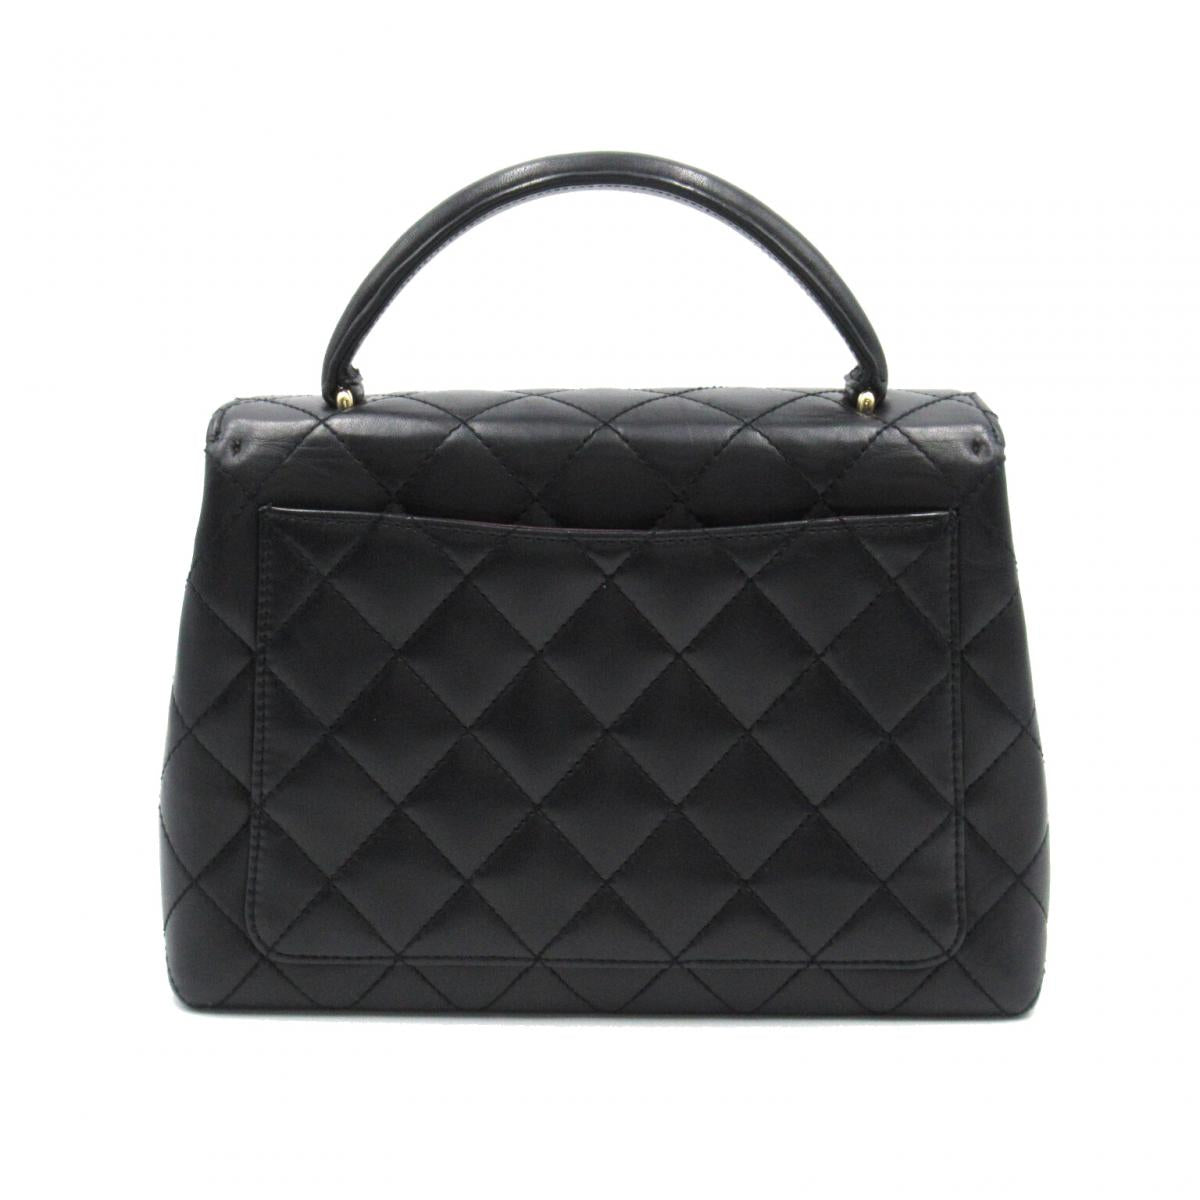 CC Quilted Leather Kelly Handbag